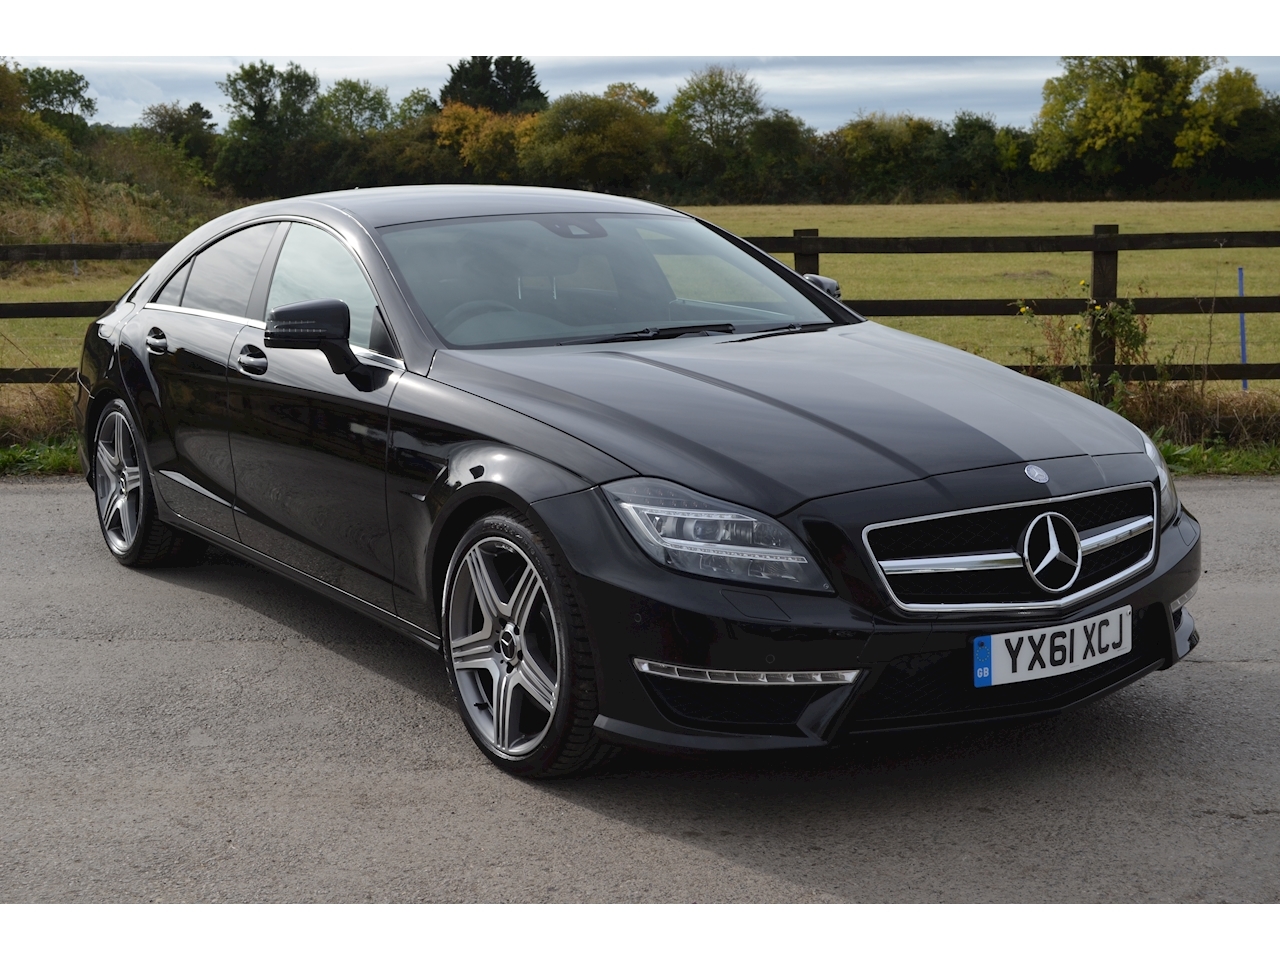 CLS 5.5 CLS63 AMG Coupe 4dr Petrol MCT (231 g/km, 525 bhp)